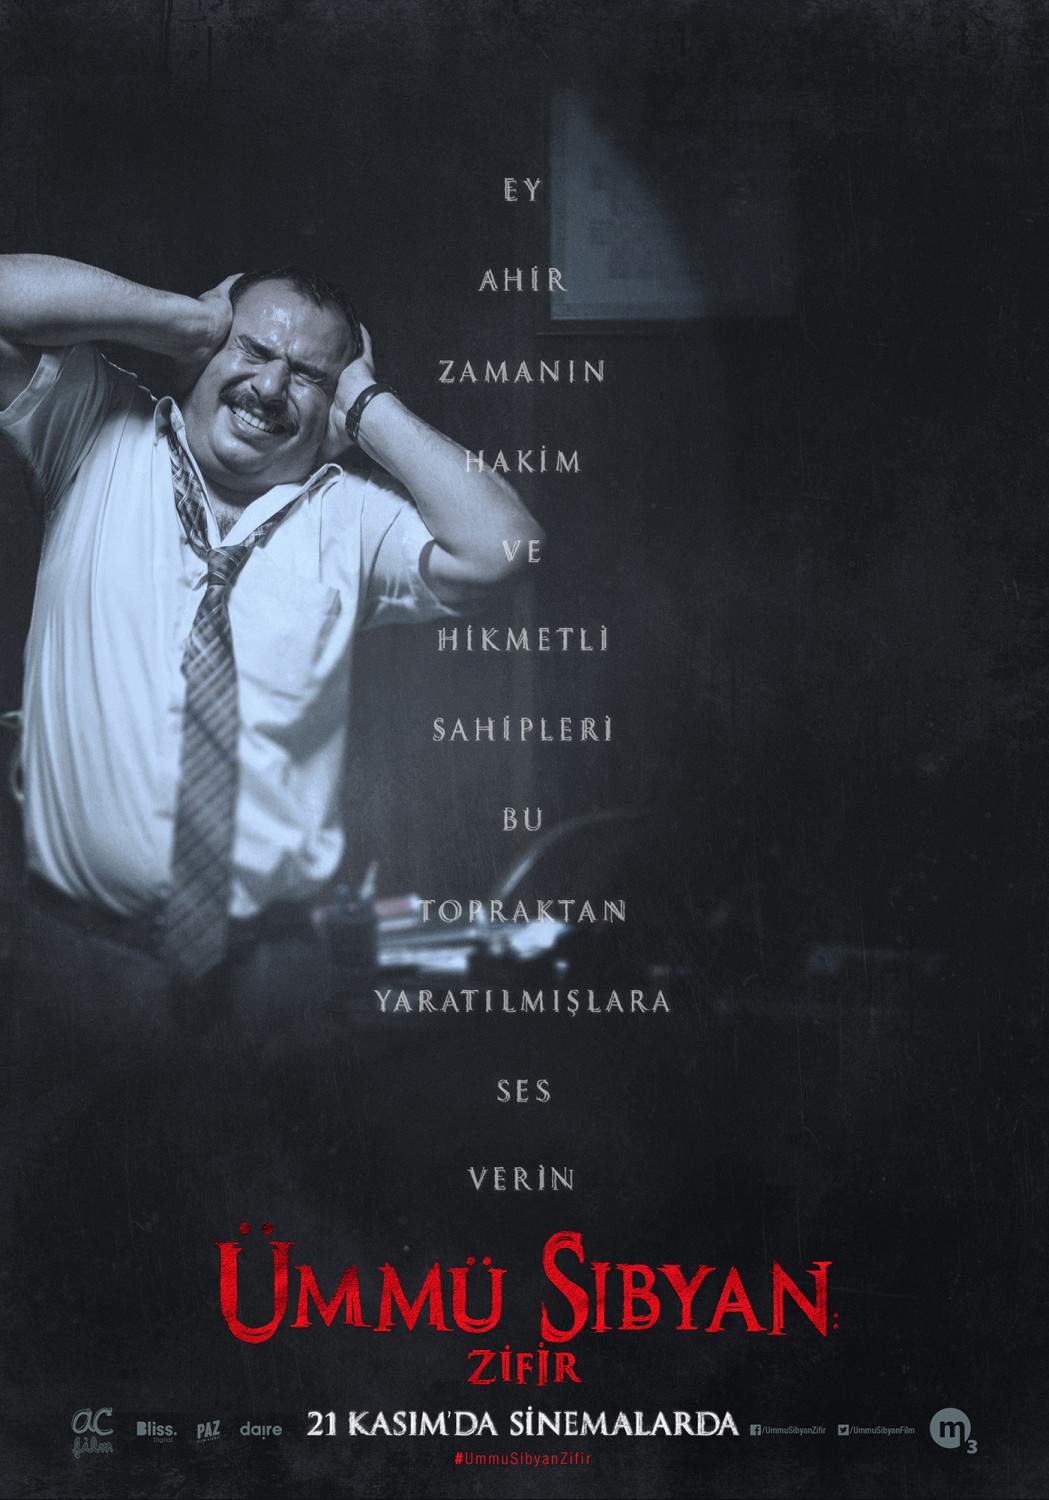 Extra Large Movie Poster Image for Ümmü Sıbyan Zifir (#11 of 12)